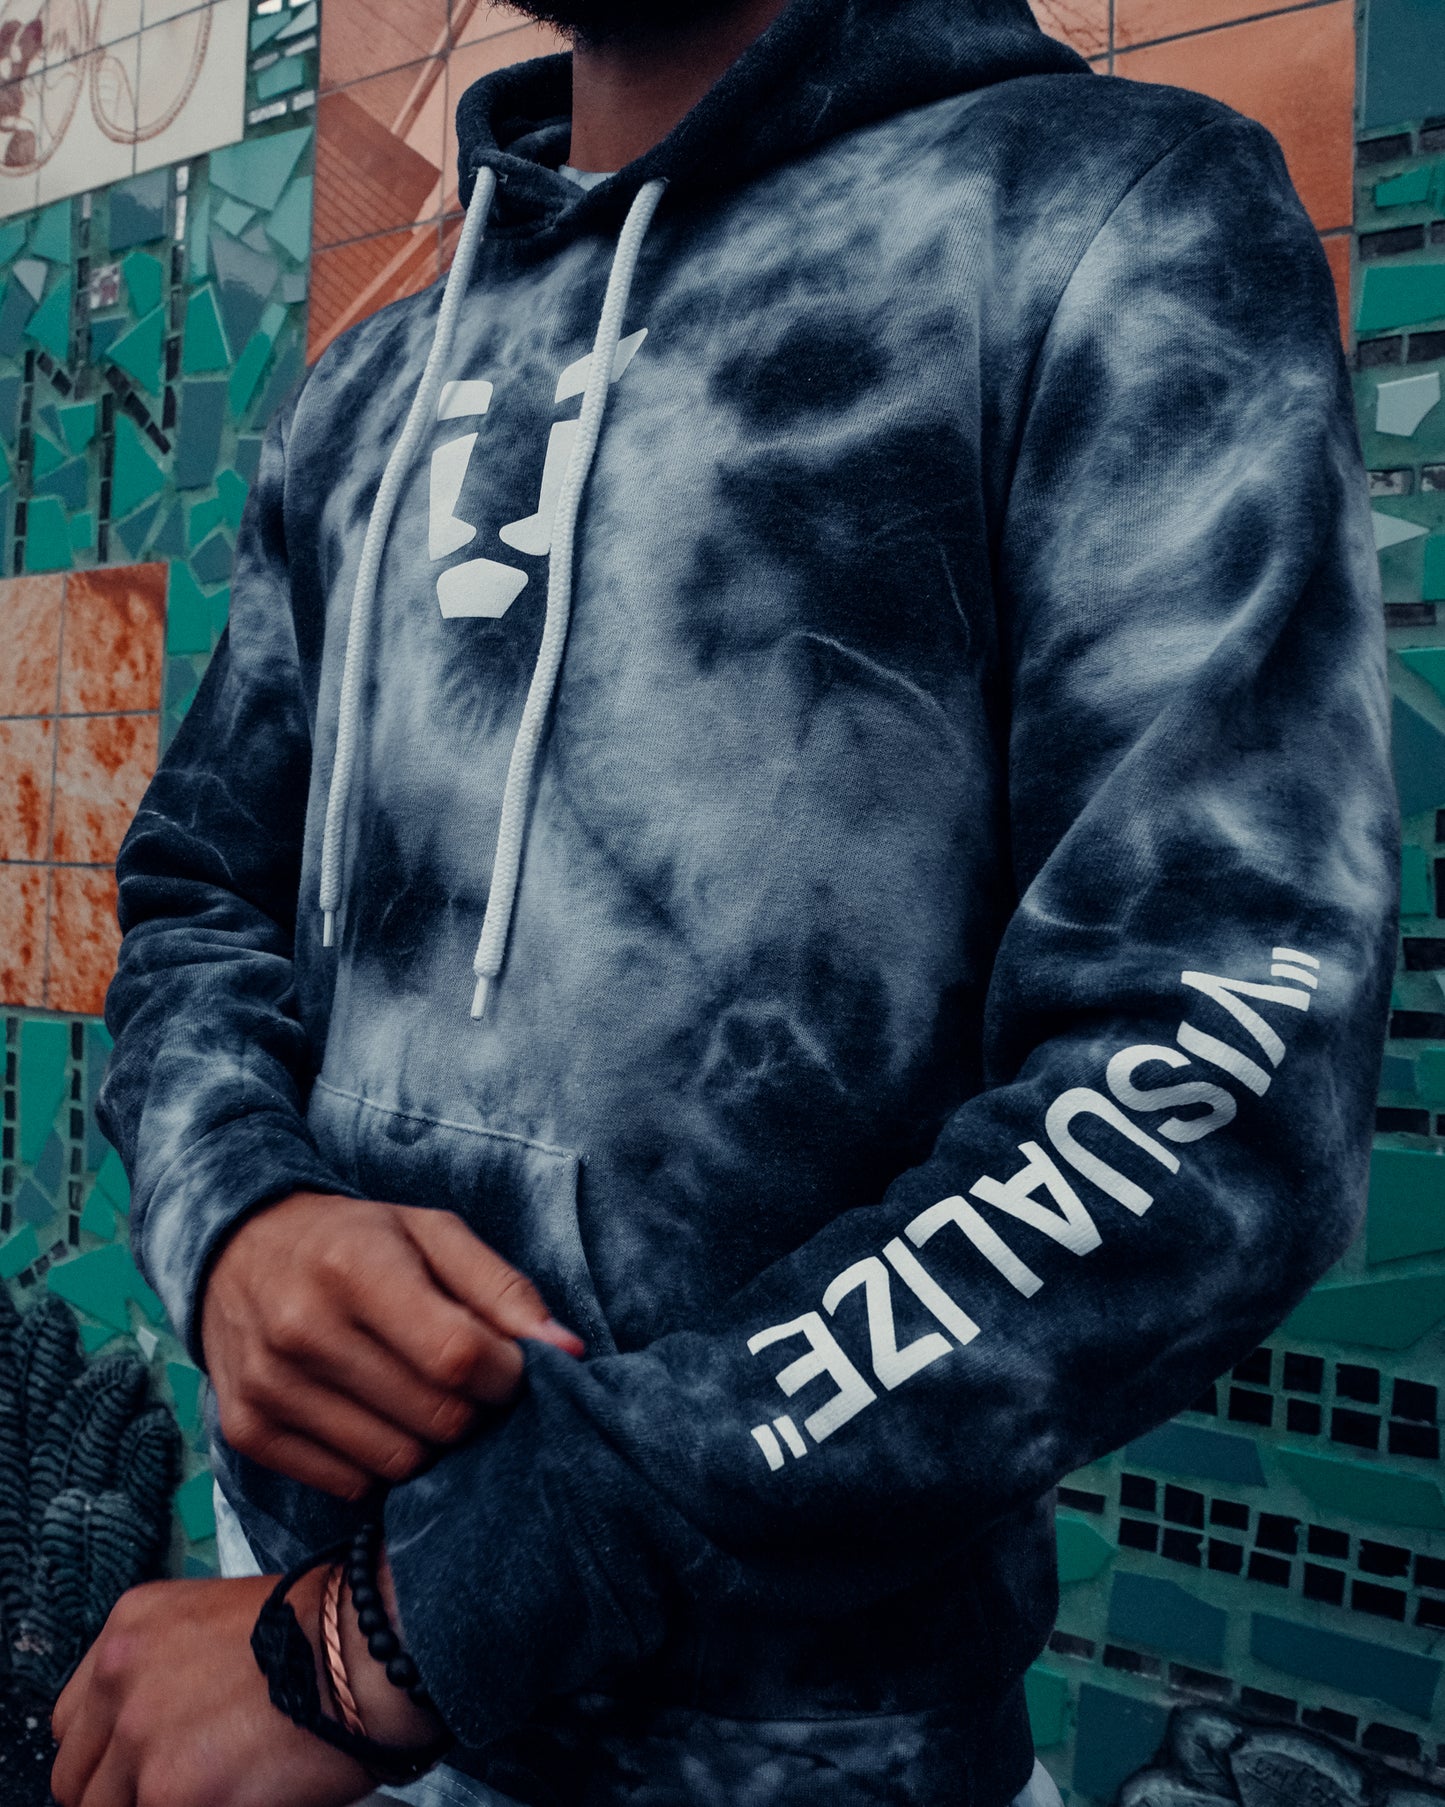 Vybe "VISUALIZE" cloud storm hoodie